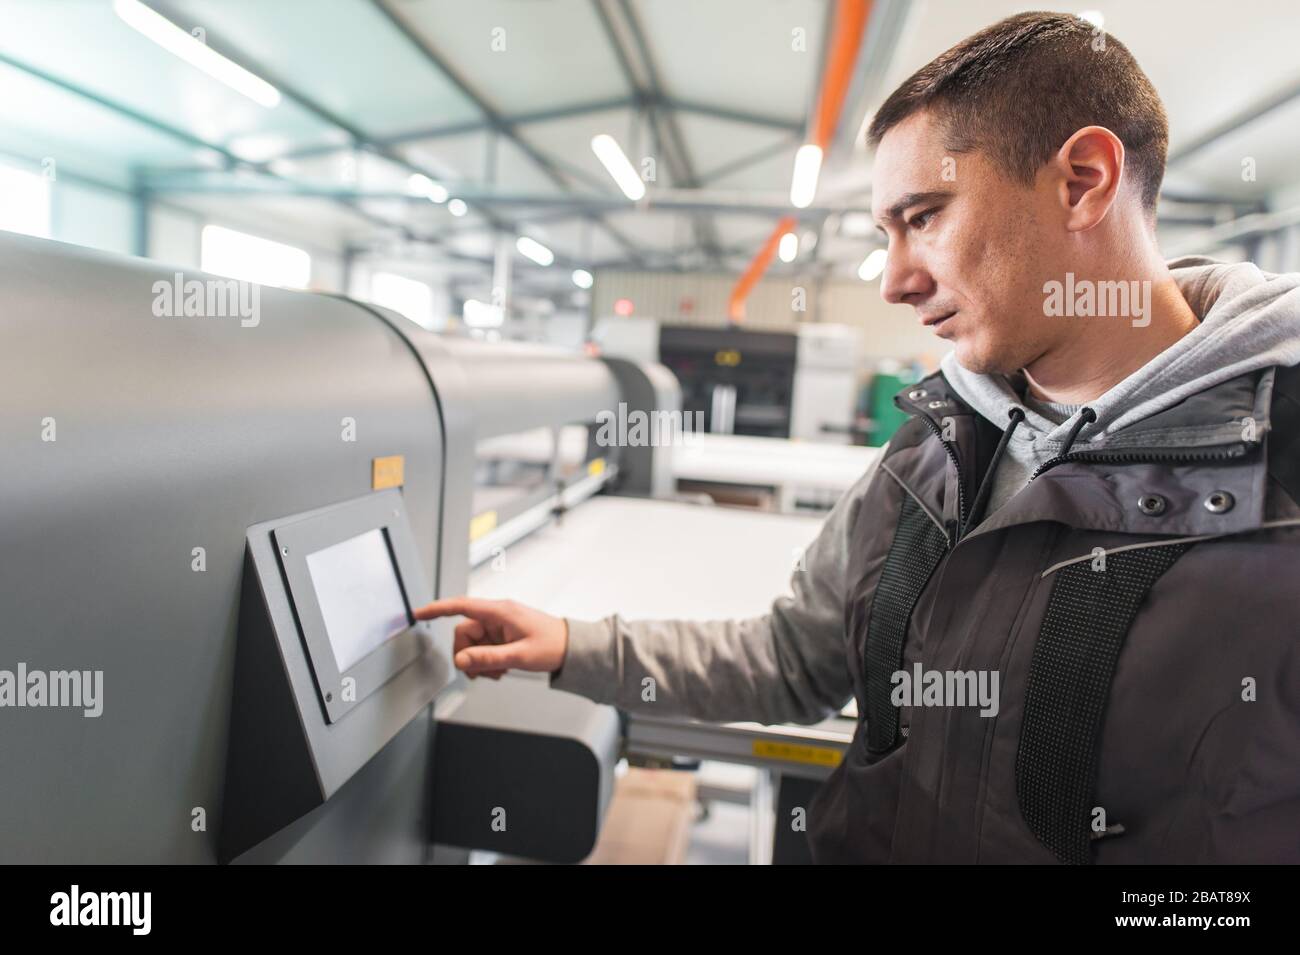 Press High Resolution Stock Photography and Images - Alamy